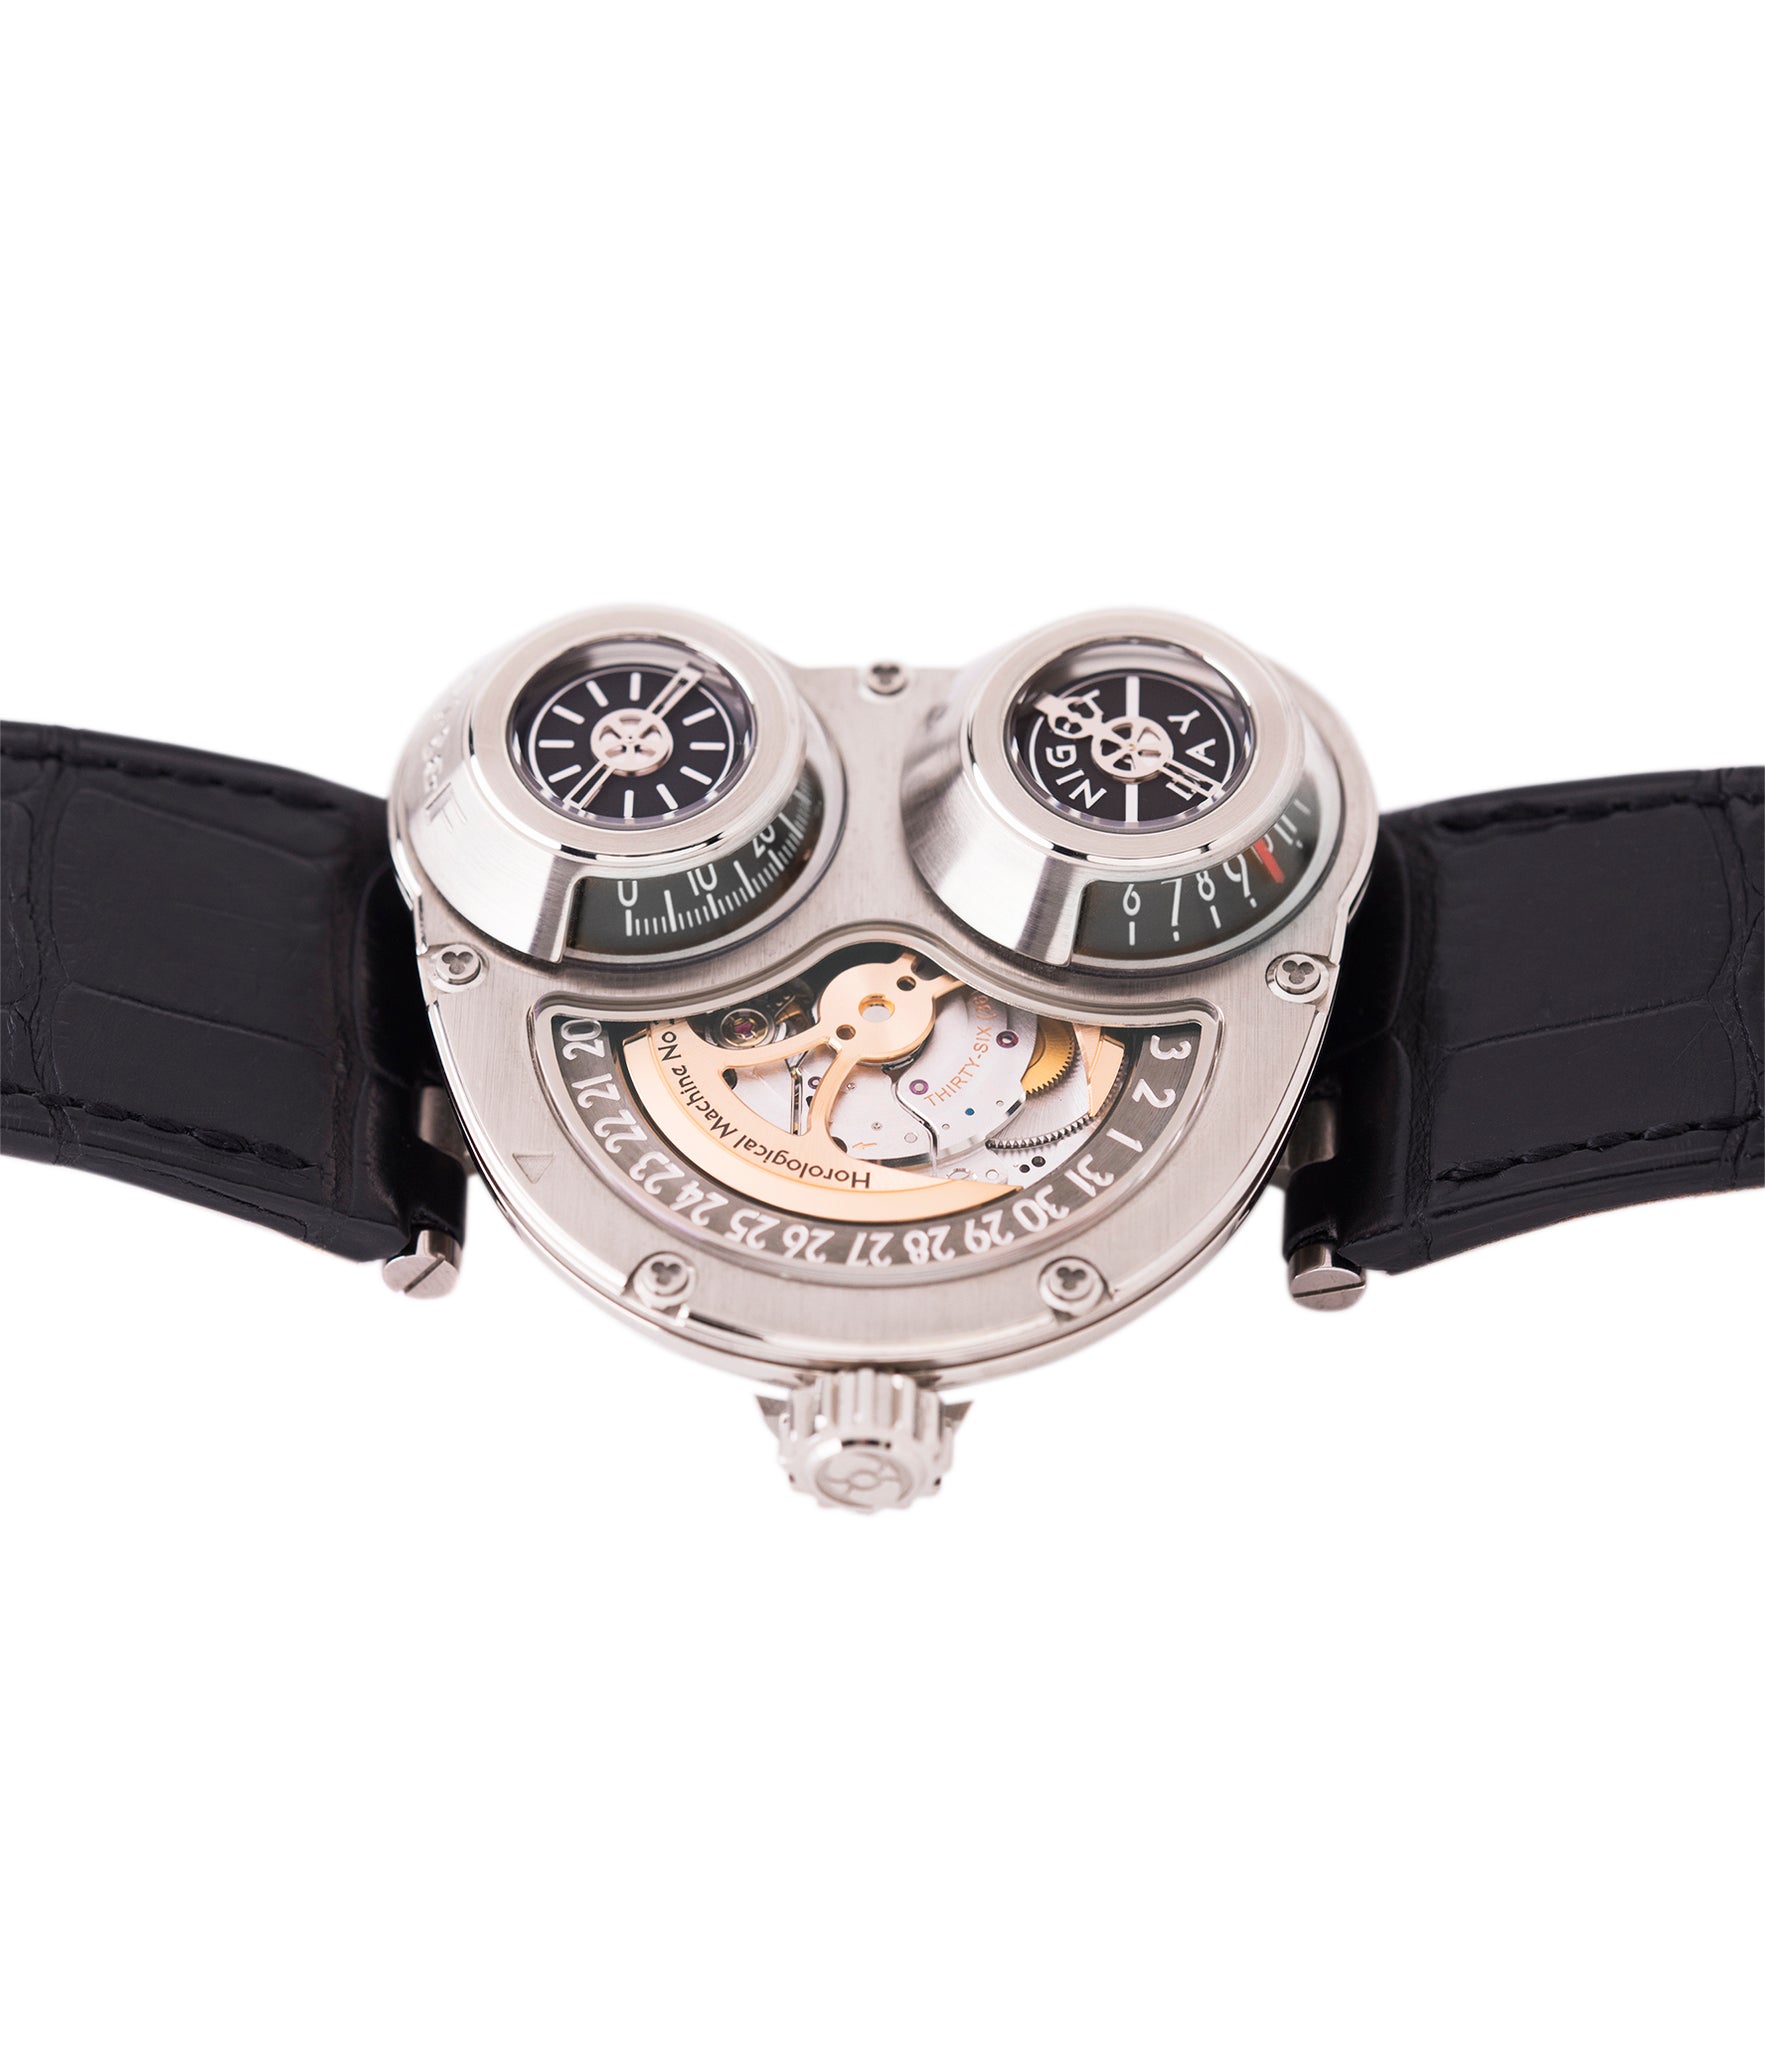 Max Busser Wiederrecht MB&F Sidewinder Horological Machine HM3 white gold watch by independent watchmaker for sale online at A Collected Man London UK specialist of rare watches